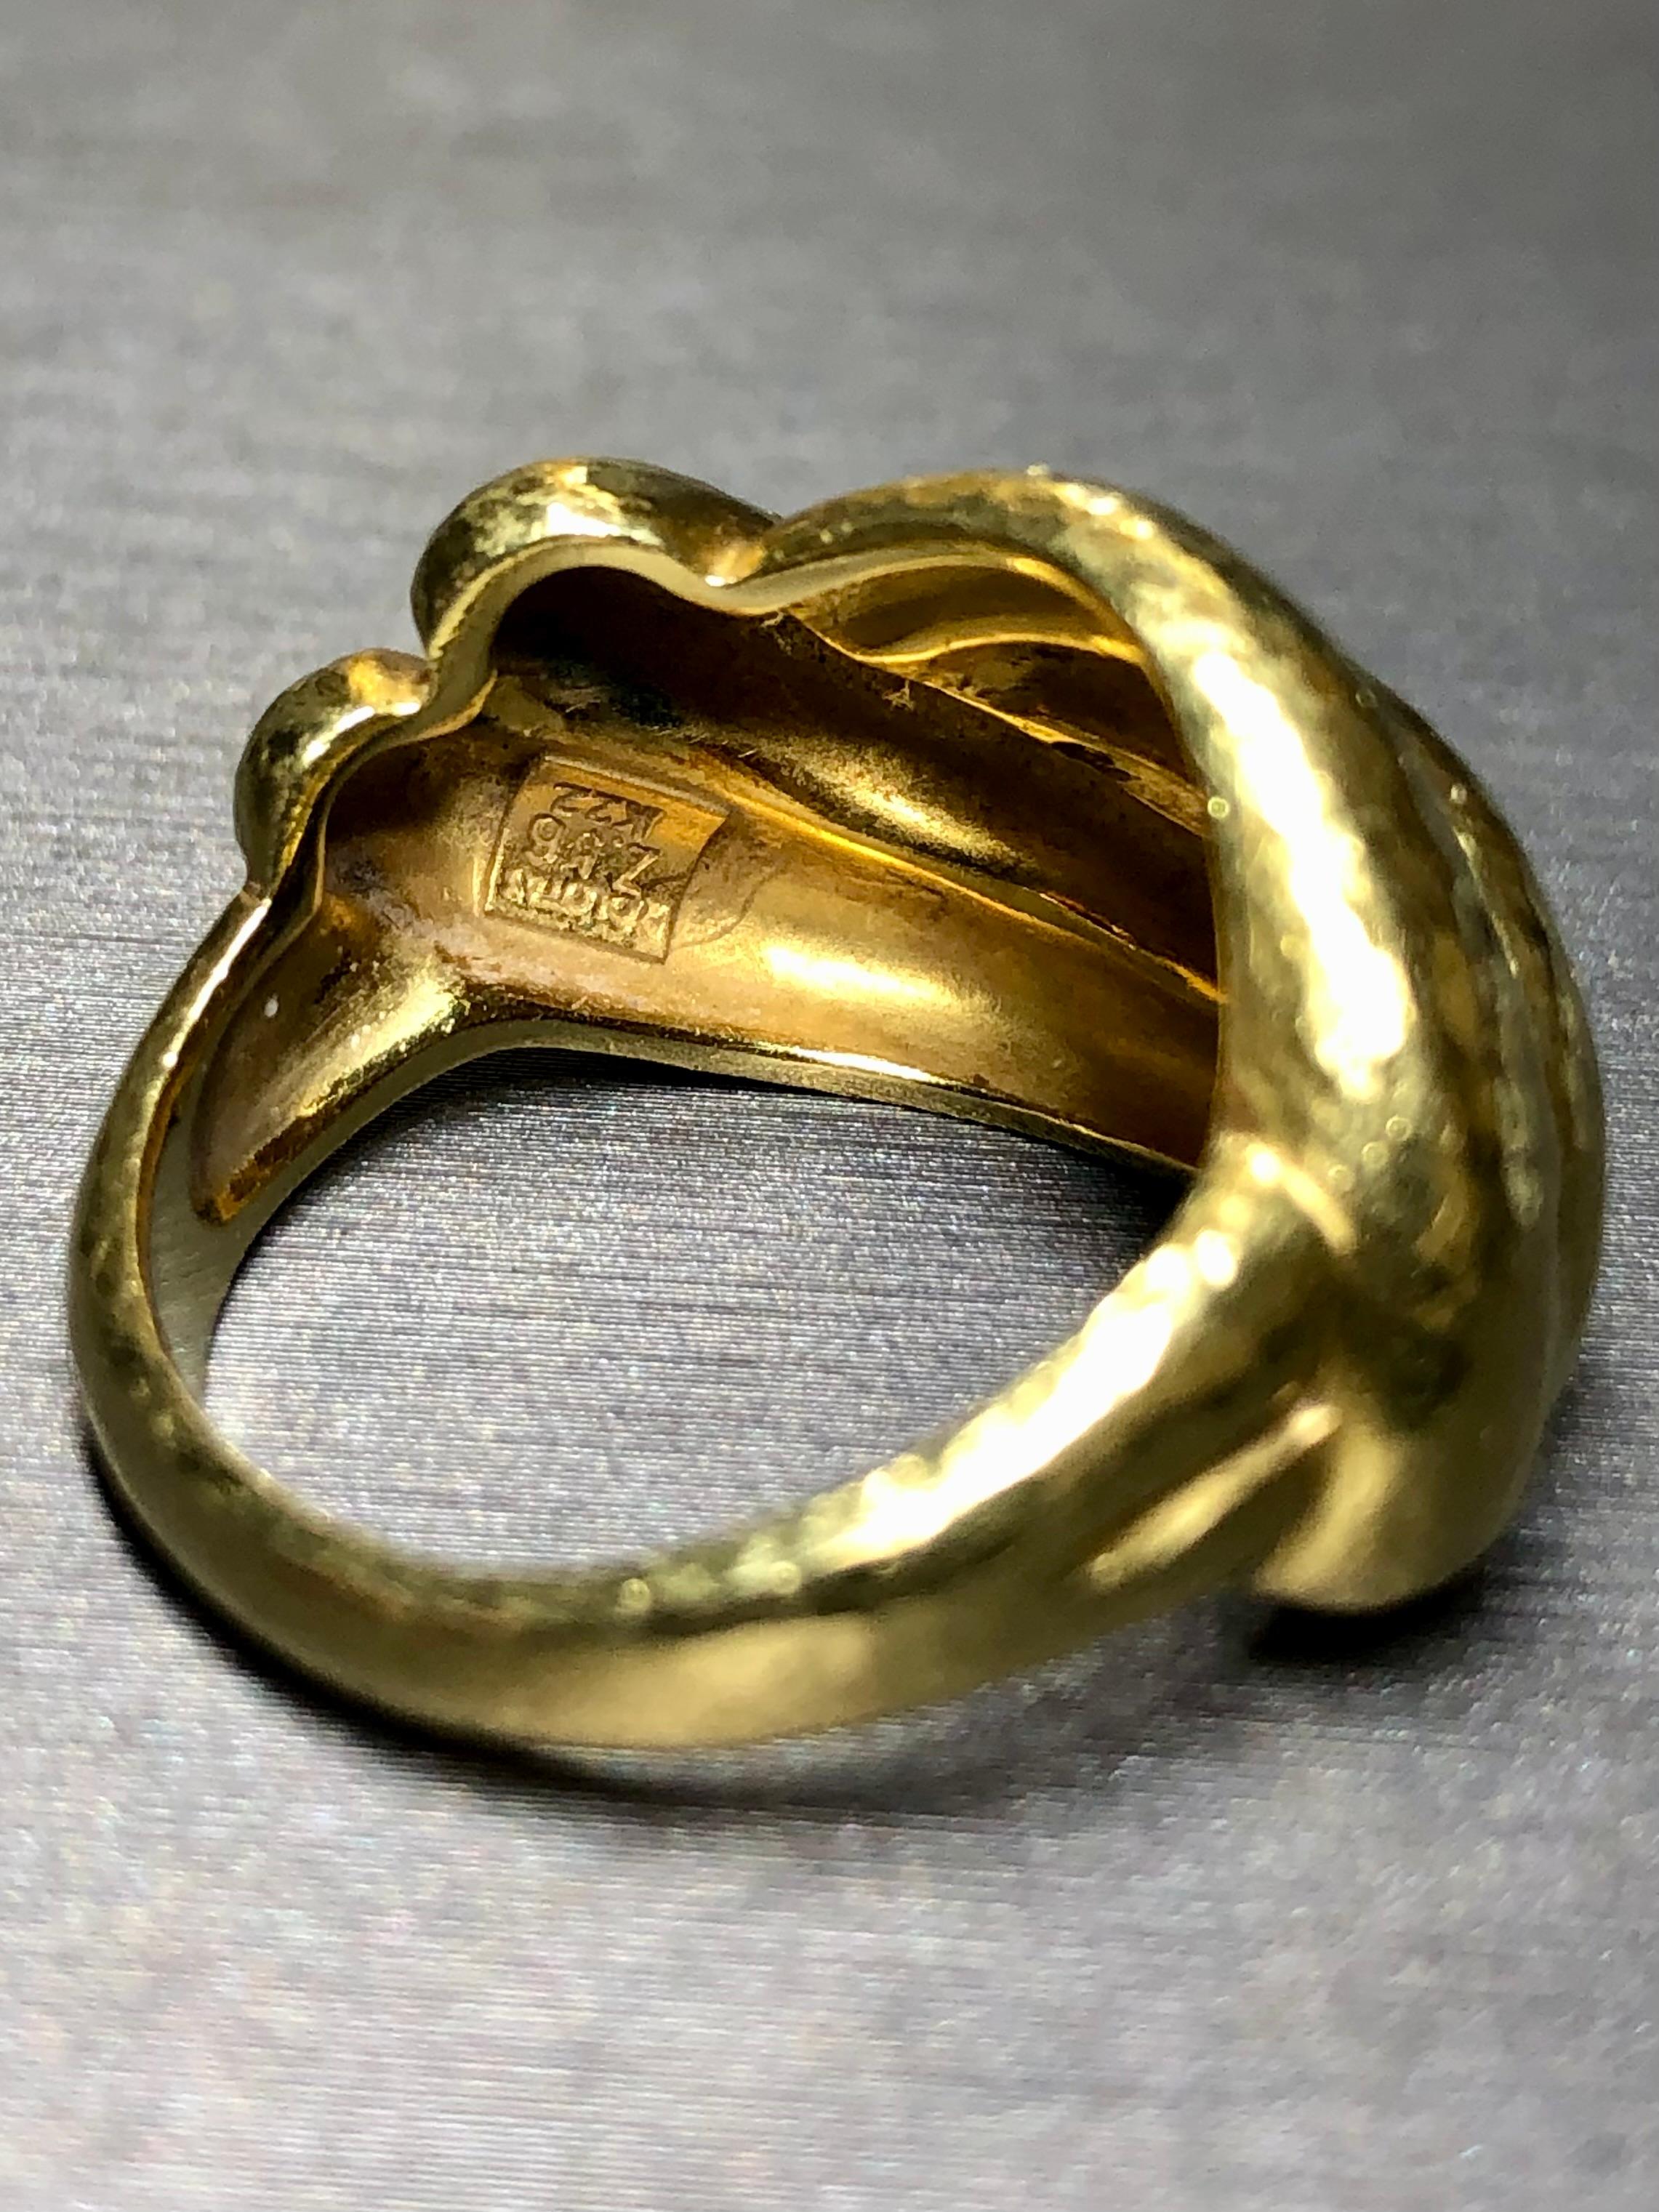 Vintage ZOLOTAS 22K Gold Hammered Finish Knot Cocktail Ring Sz 7.75 In Good Condition For Sale In Winter Springs, FL